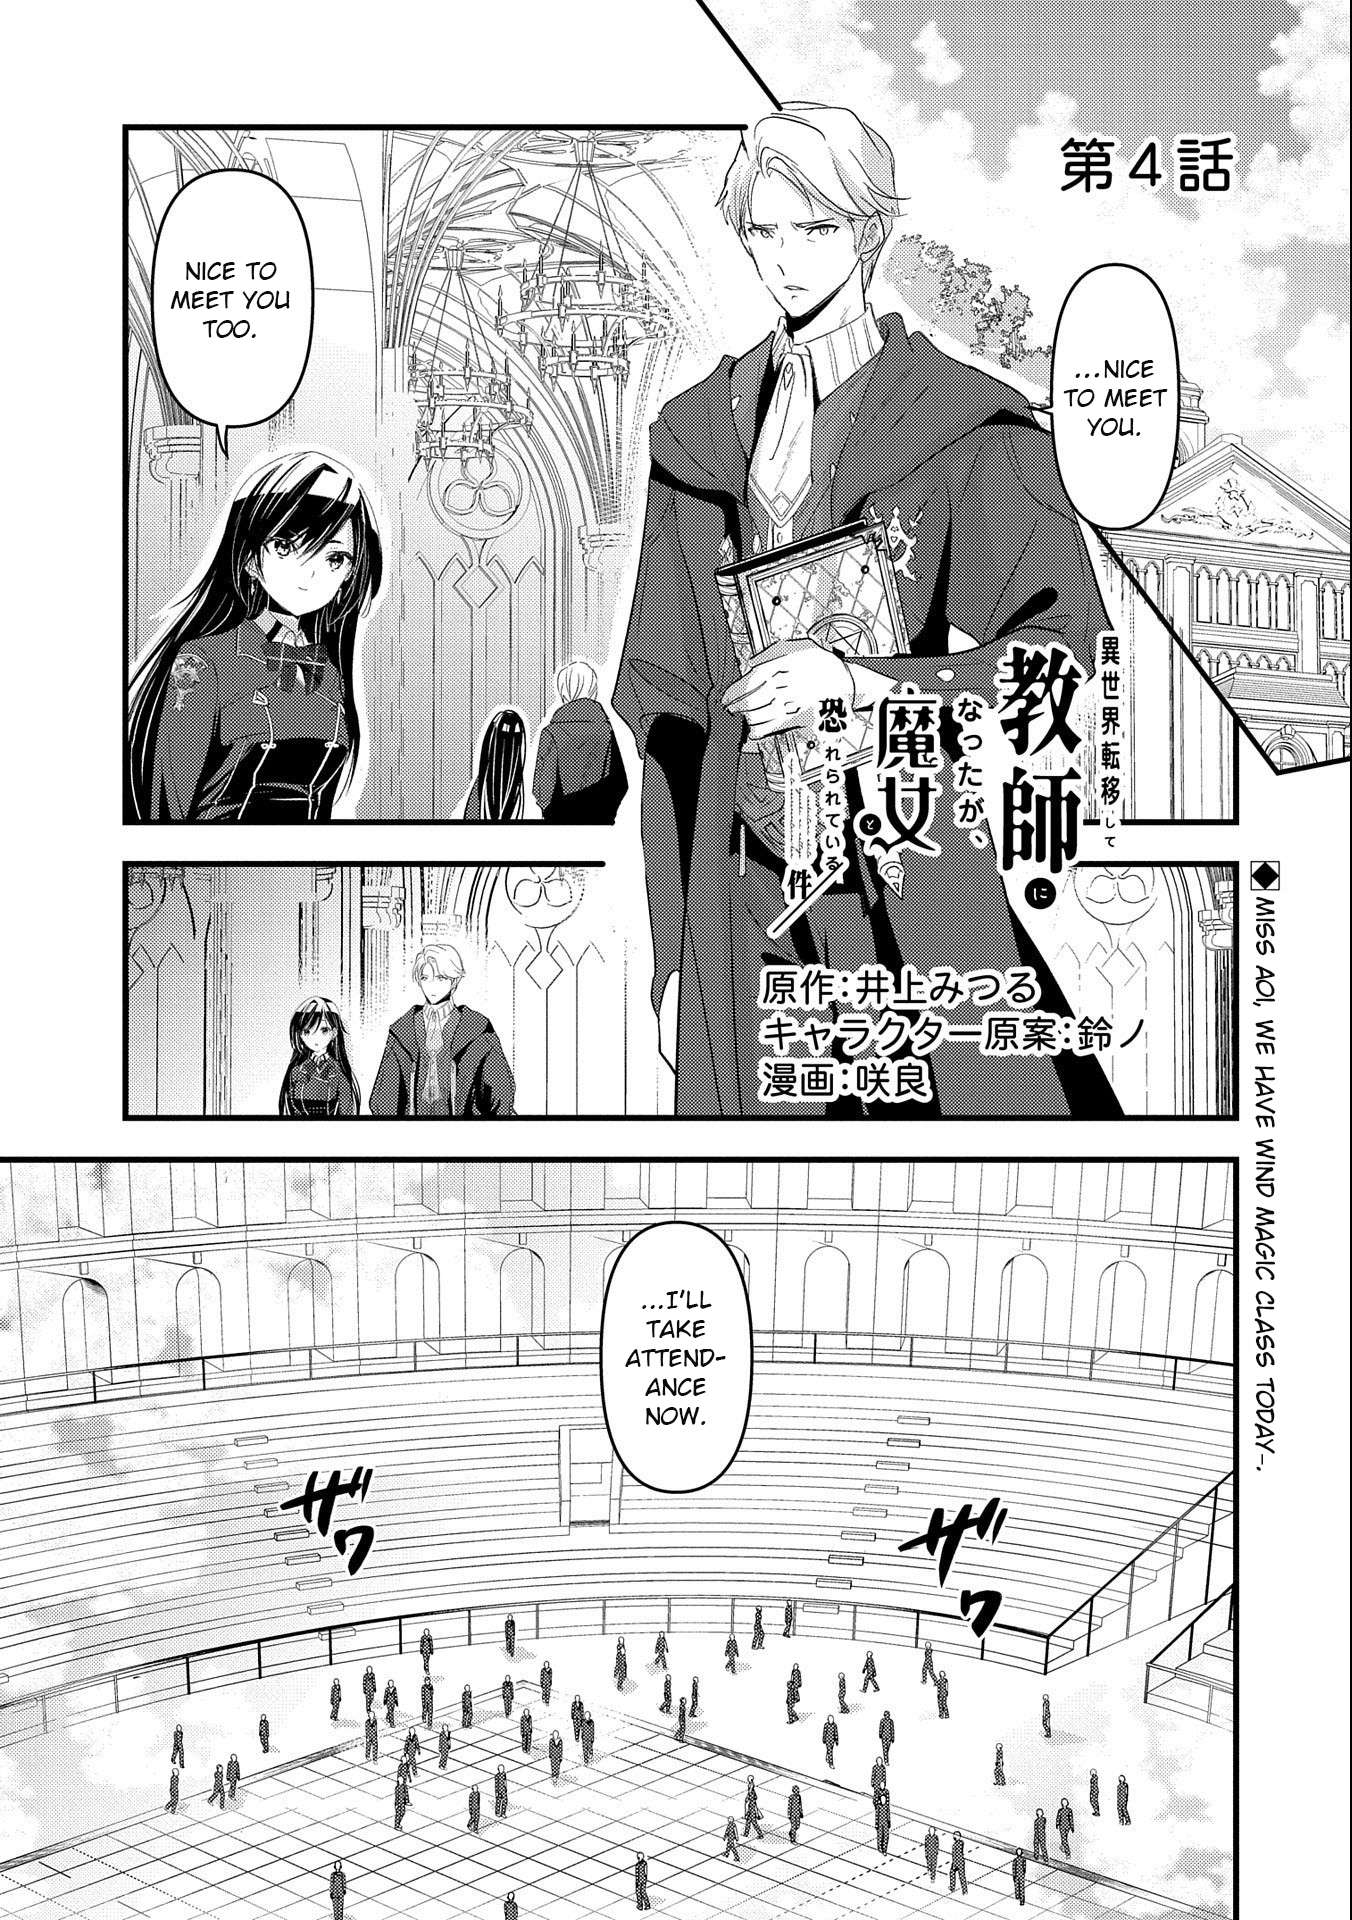 I Was Transferred To Another World And Became A Teacher, But I'm Feared As A Witch: Aoi-sensei's Academy Struggle Log - chapter 4 - #2